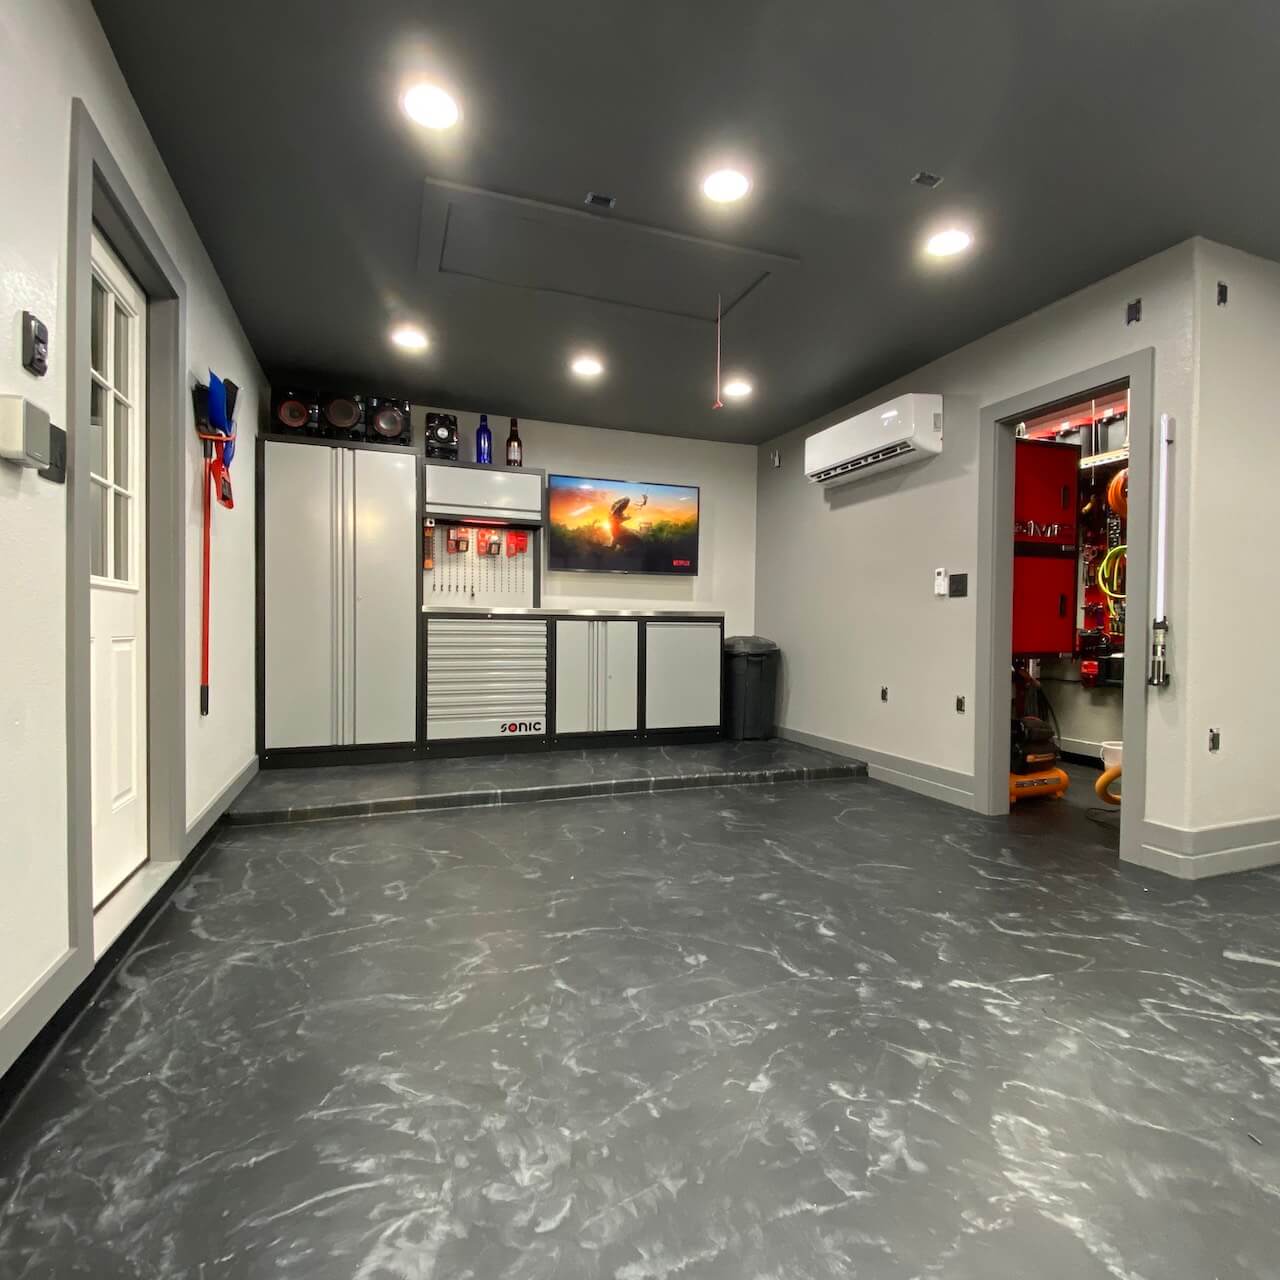 This metallic epoxy garage floor features a dark gray base with white highlights.  The garage has been completely remodeled and even has a TV and an air conditioner